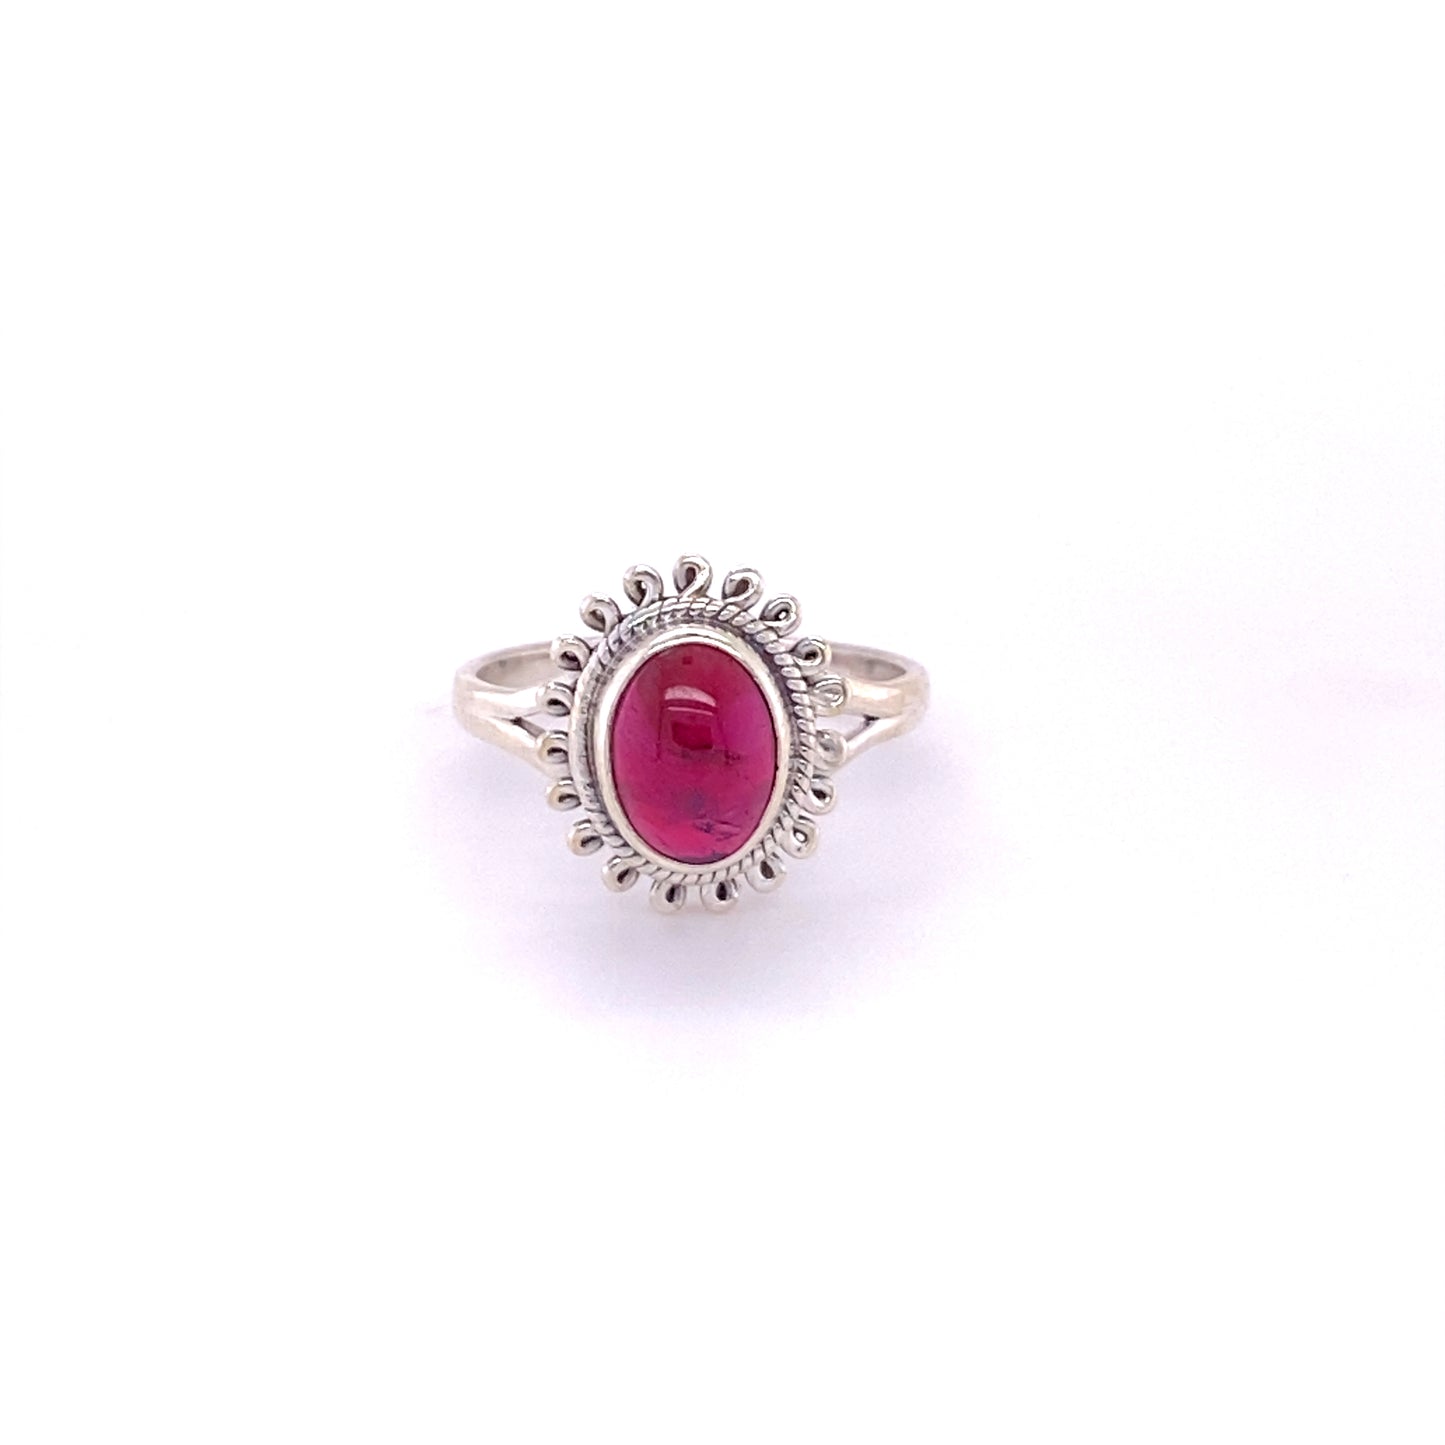 A Hippie-Chic Oval Gemstone Flower ring with a cabochon ruby stone.